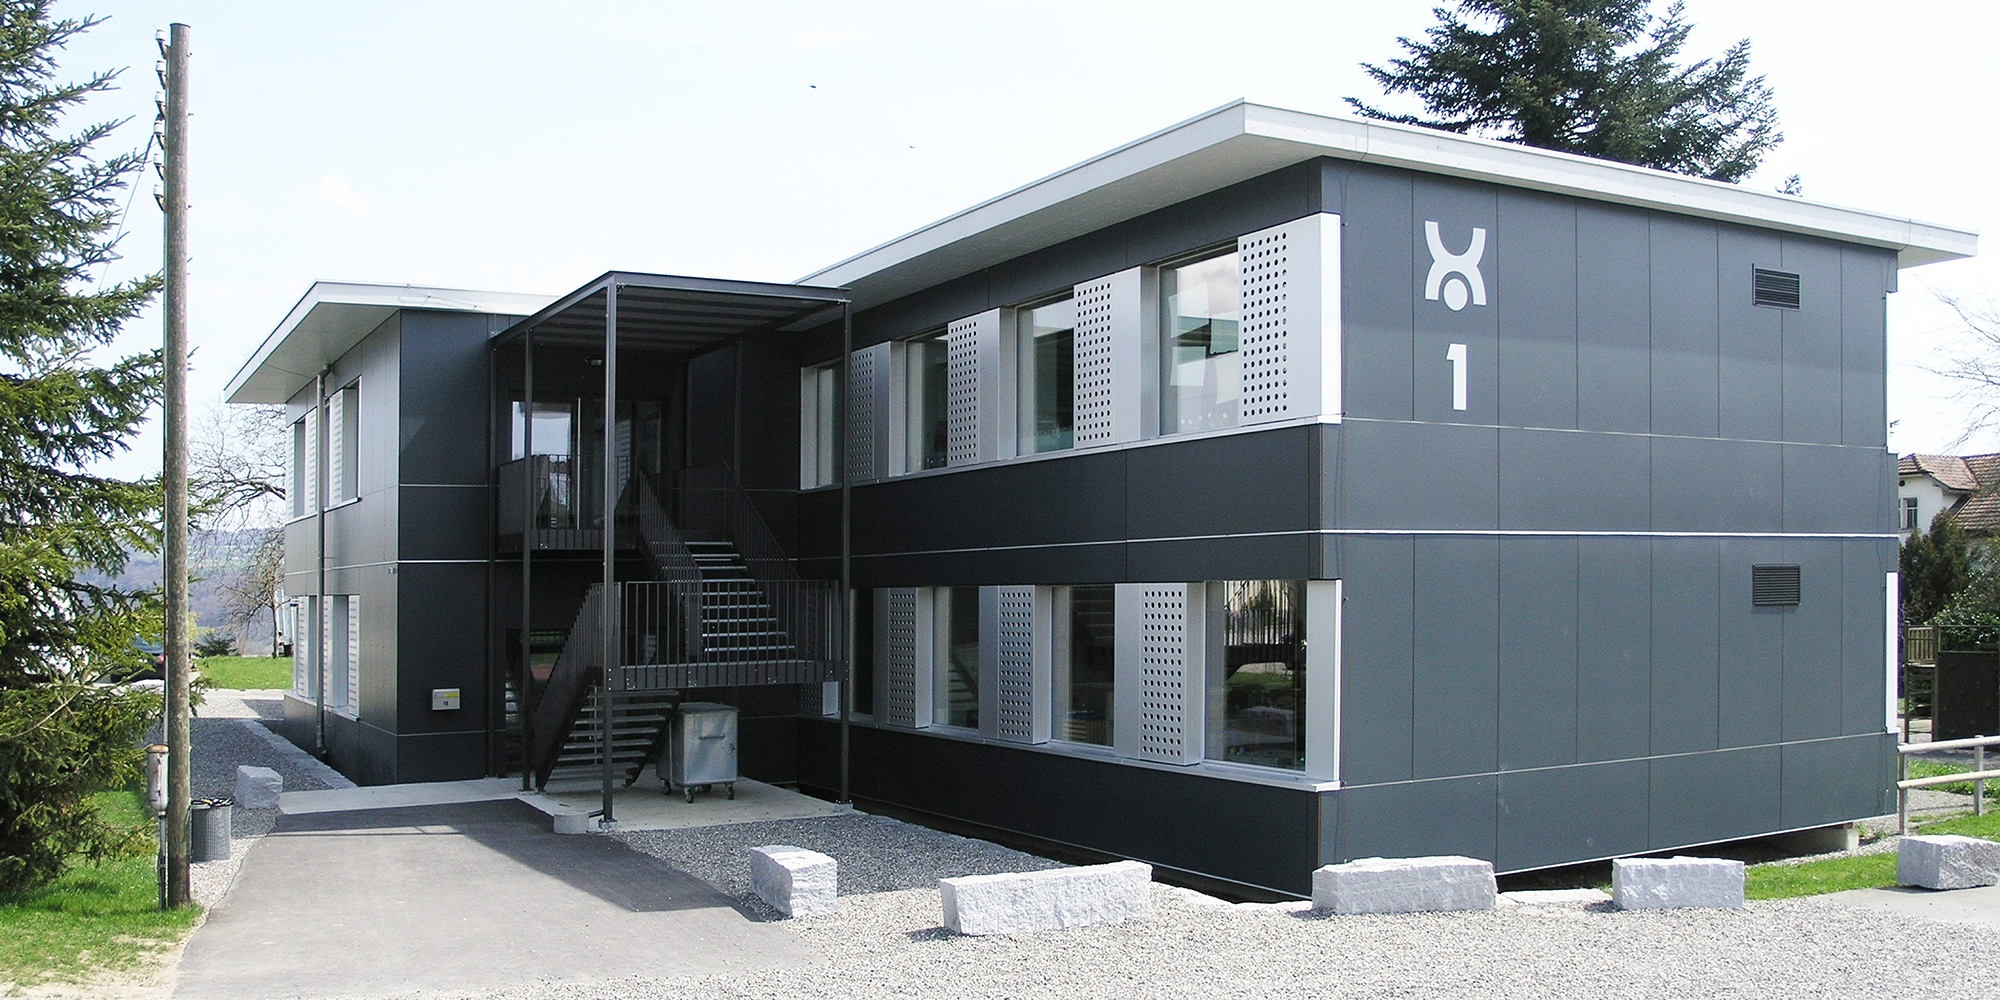 The two-storey modular construction offers sufficient space for informative lessons.